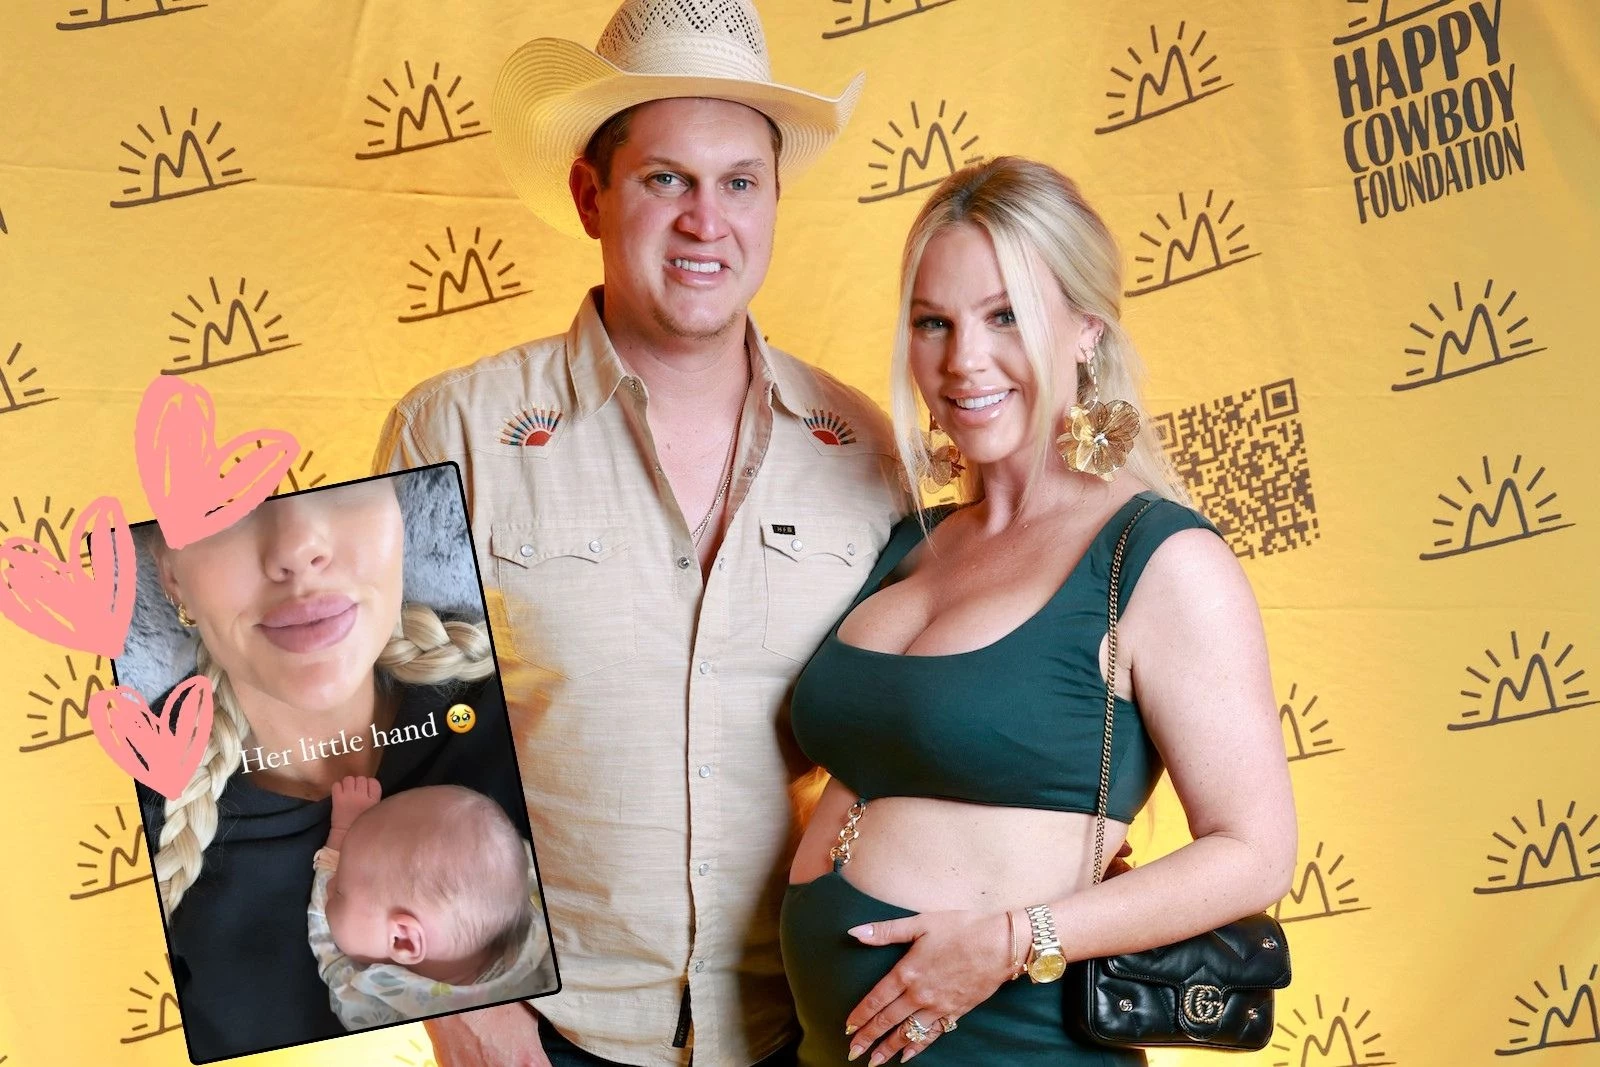 Jon Pardi’s Wife Shares Her Birth Story With Baby No. 2